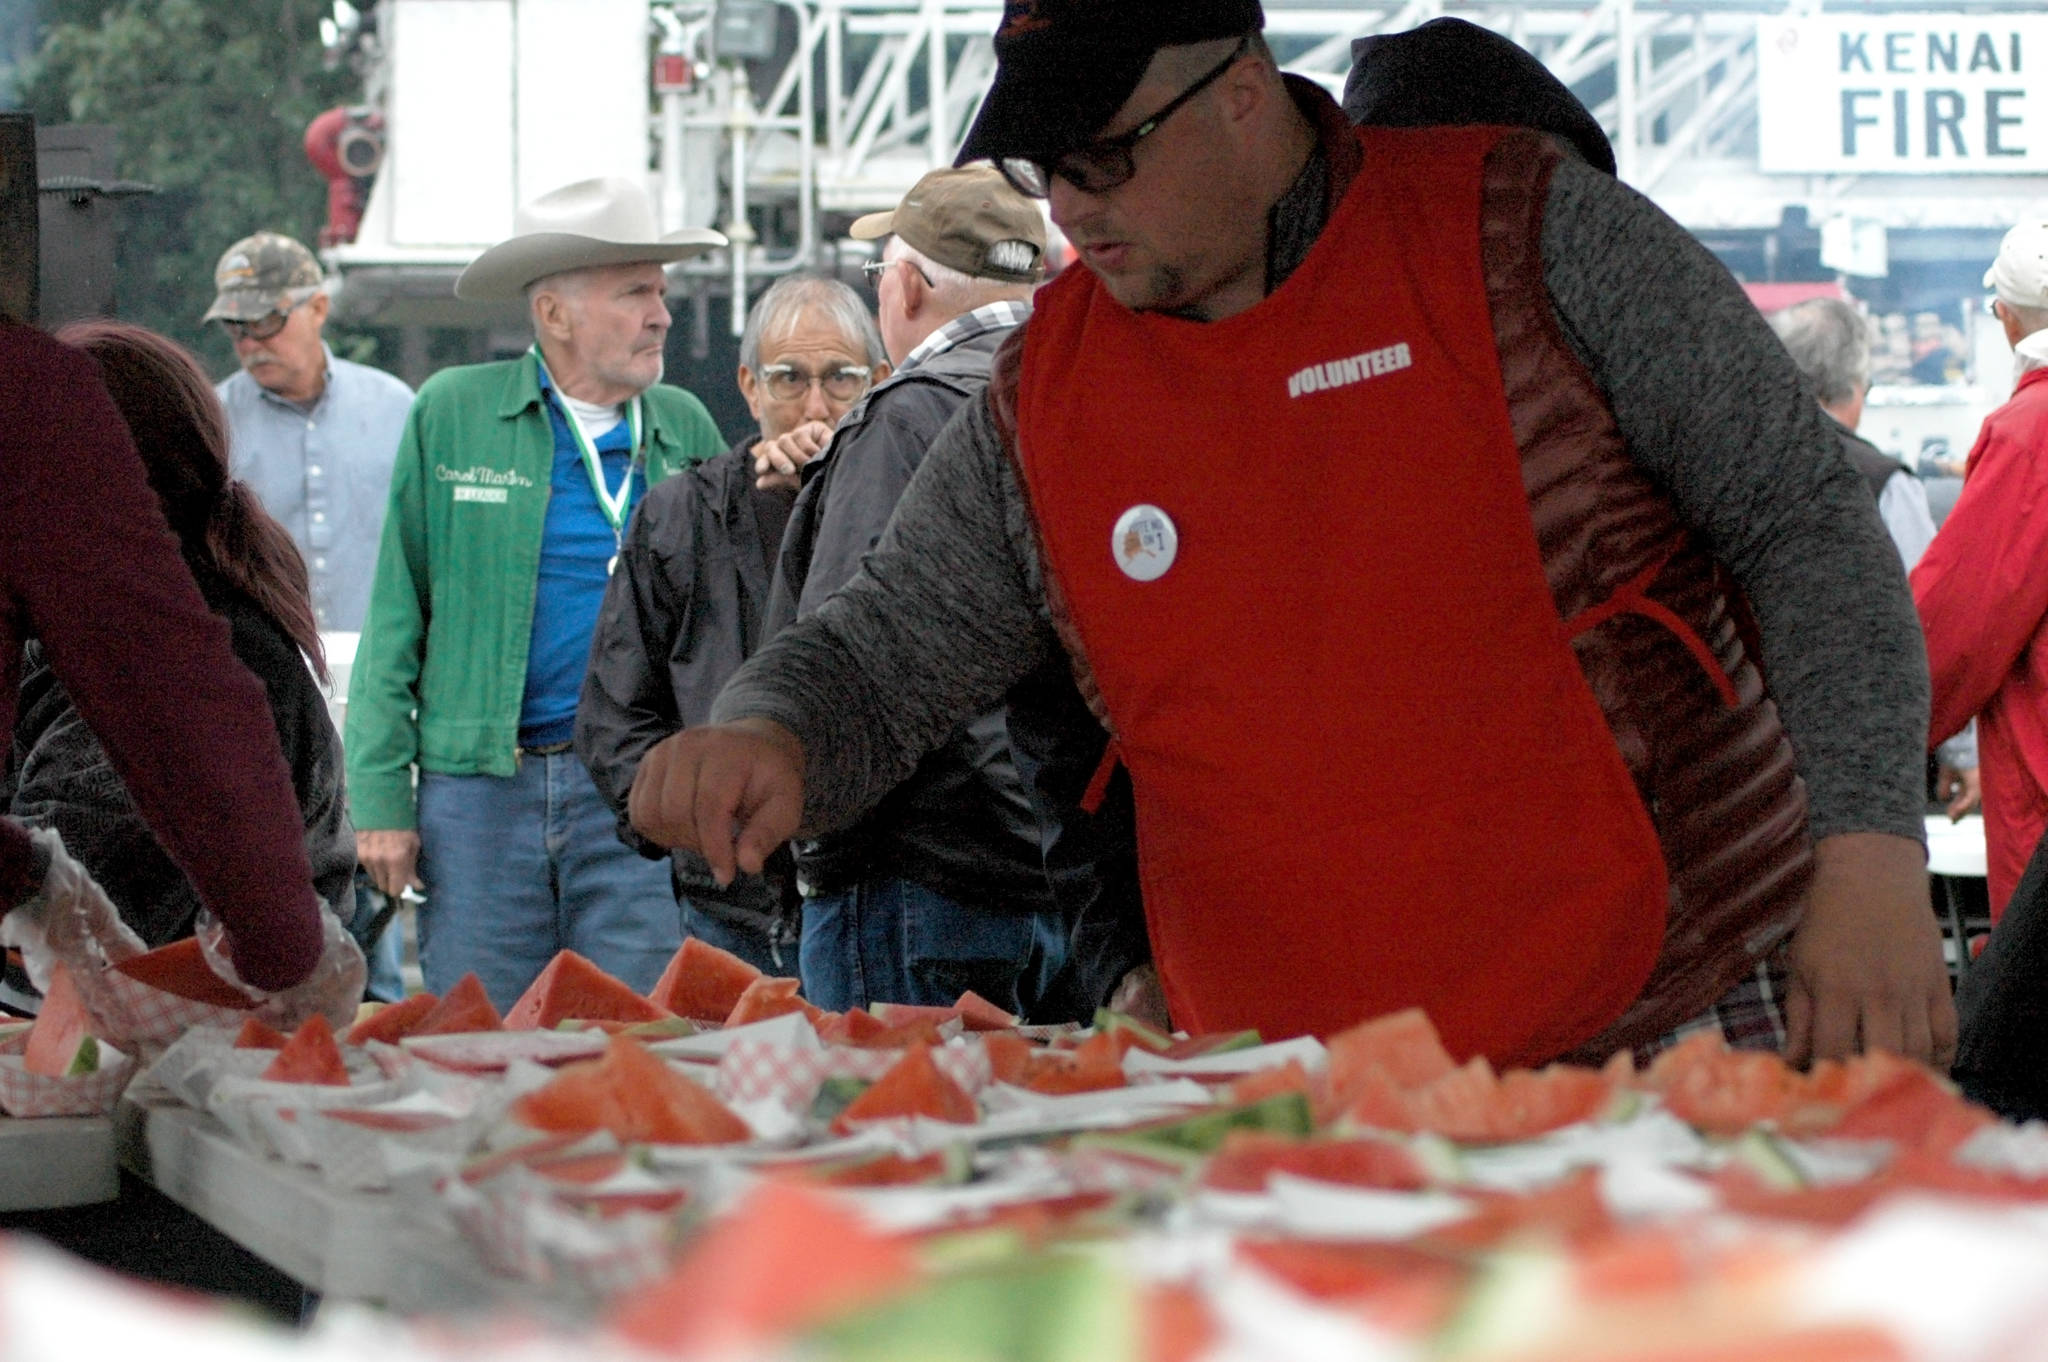 A volunteer inspects the supply of watermelon available at Industry Appreciation Day on Saturday, Aug. 25, 2018 in Kenai, Alaska. (Photo by Elizabeth Earl/Peninsula Clarion)